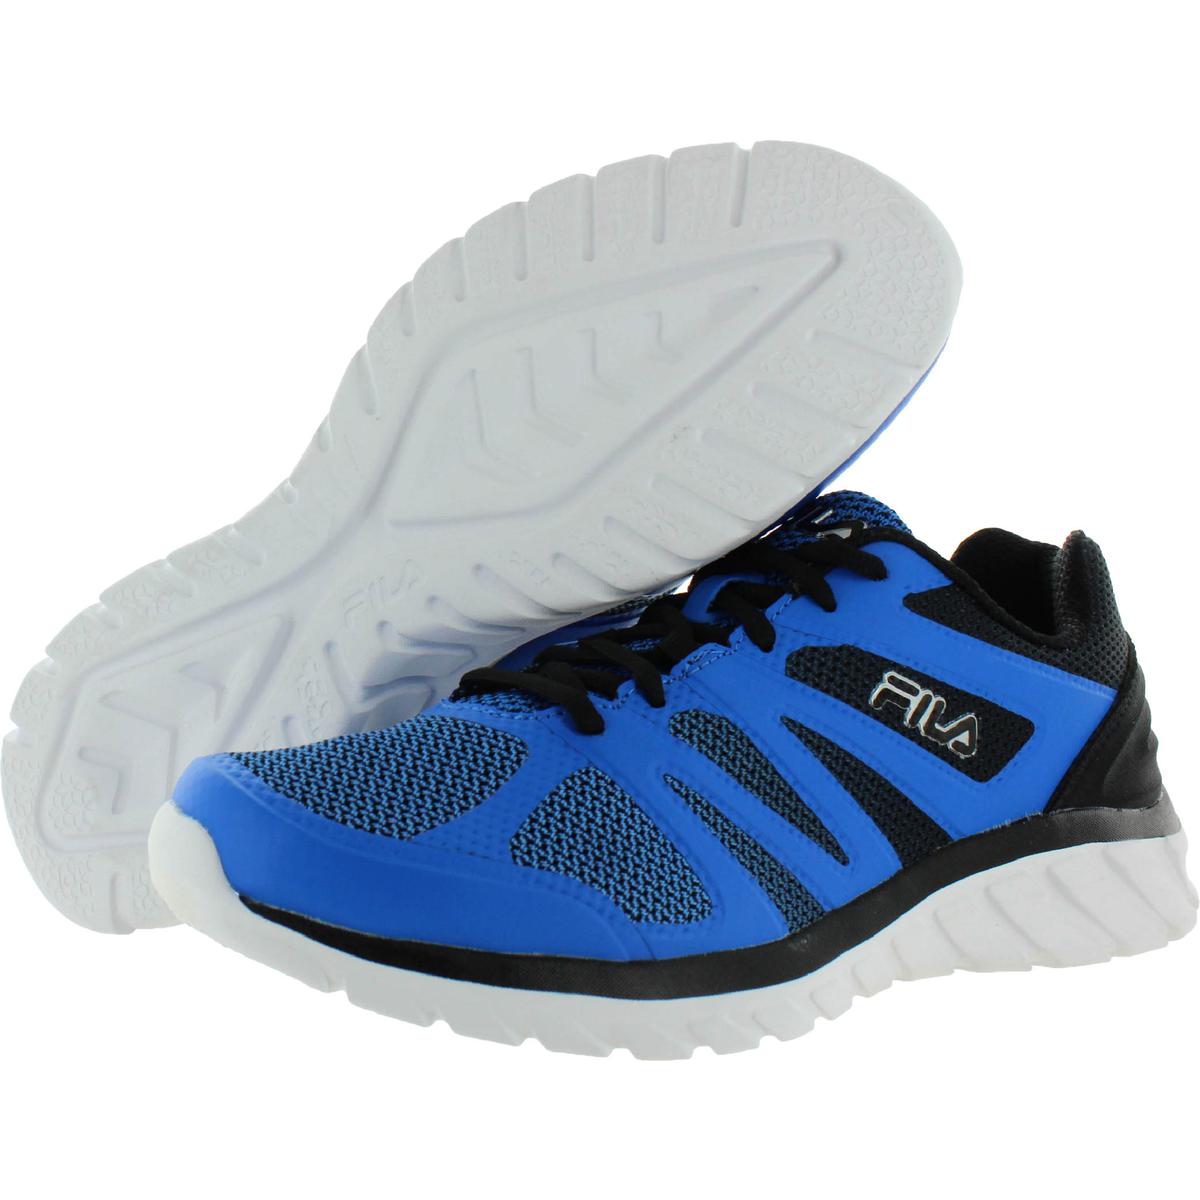 mesh running shoes meaning